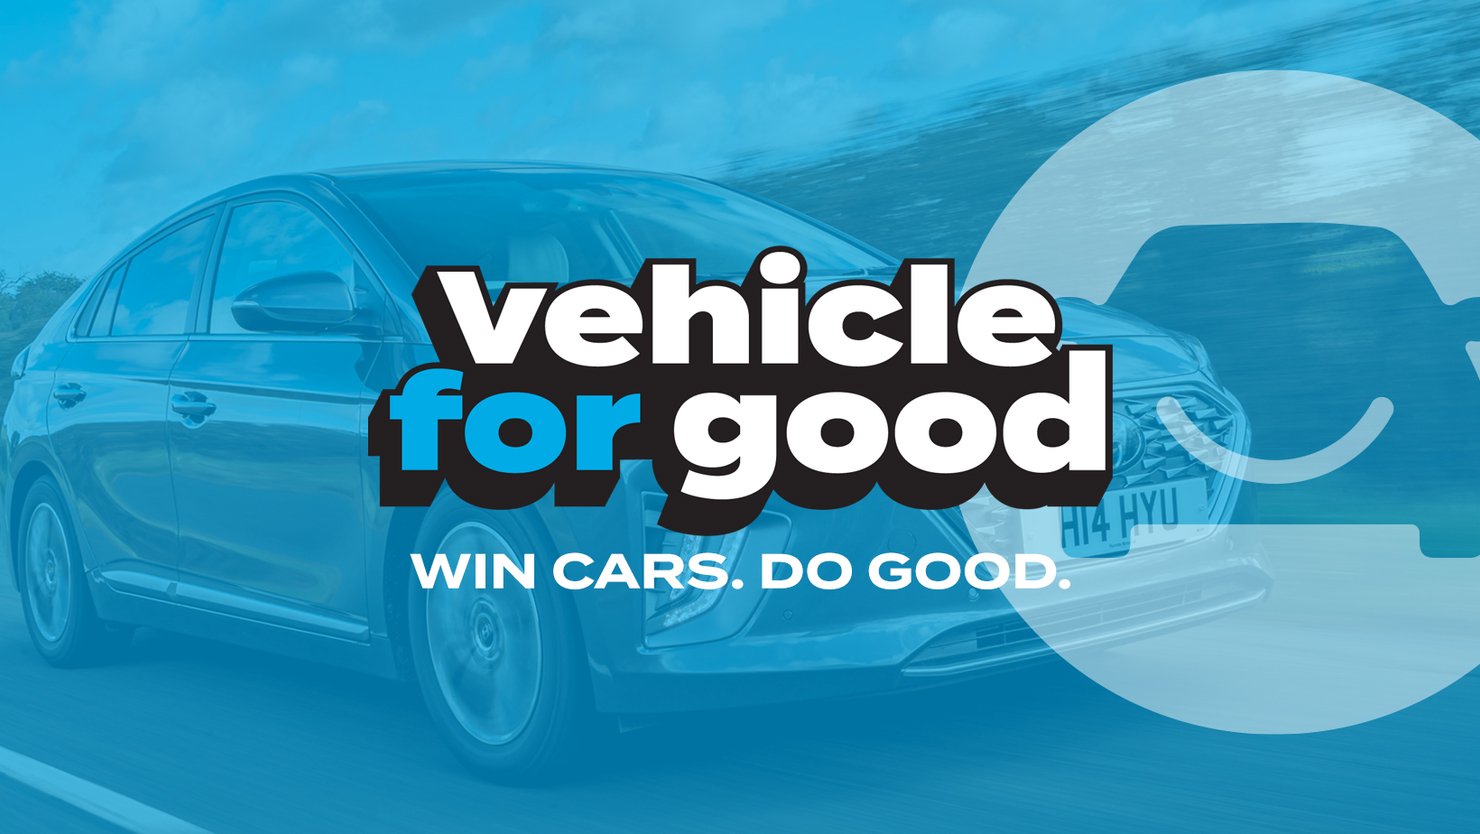 Vehicle For Good – Win Cars. Do Good.